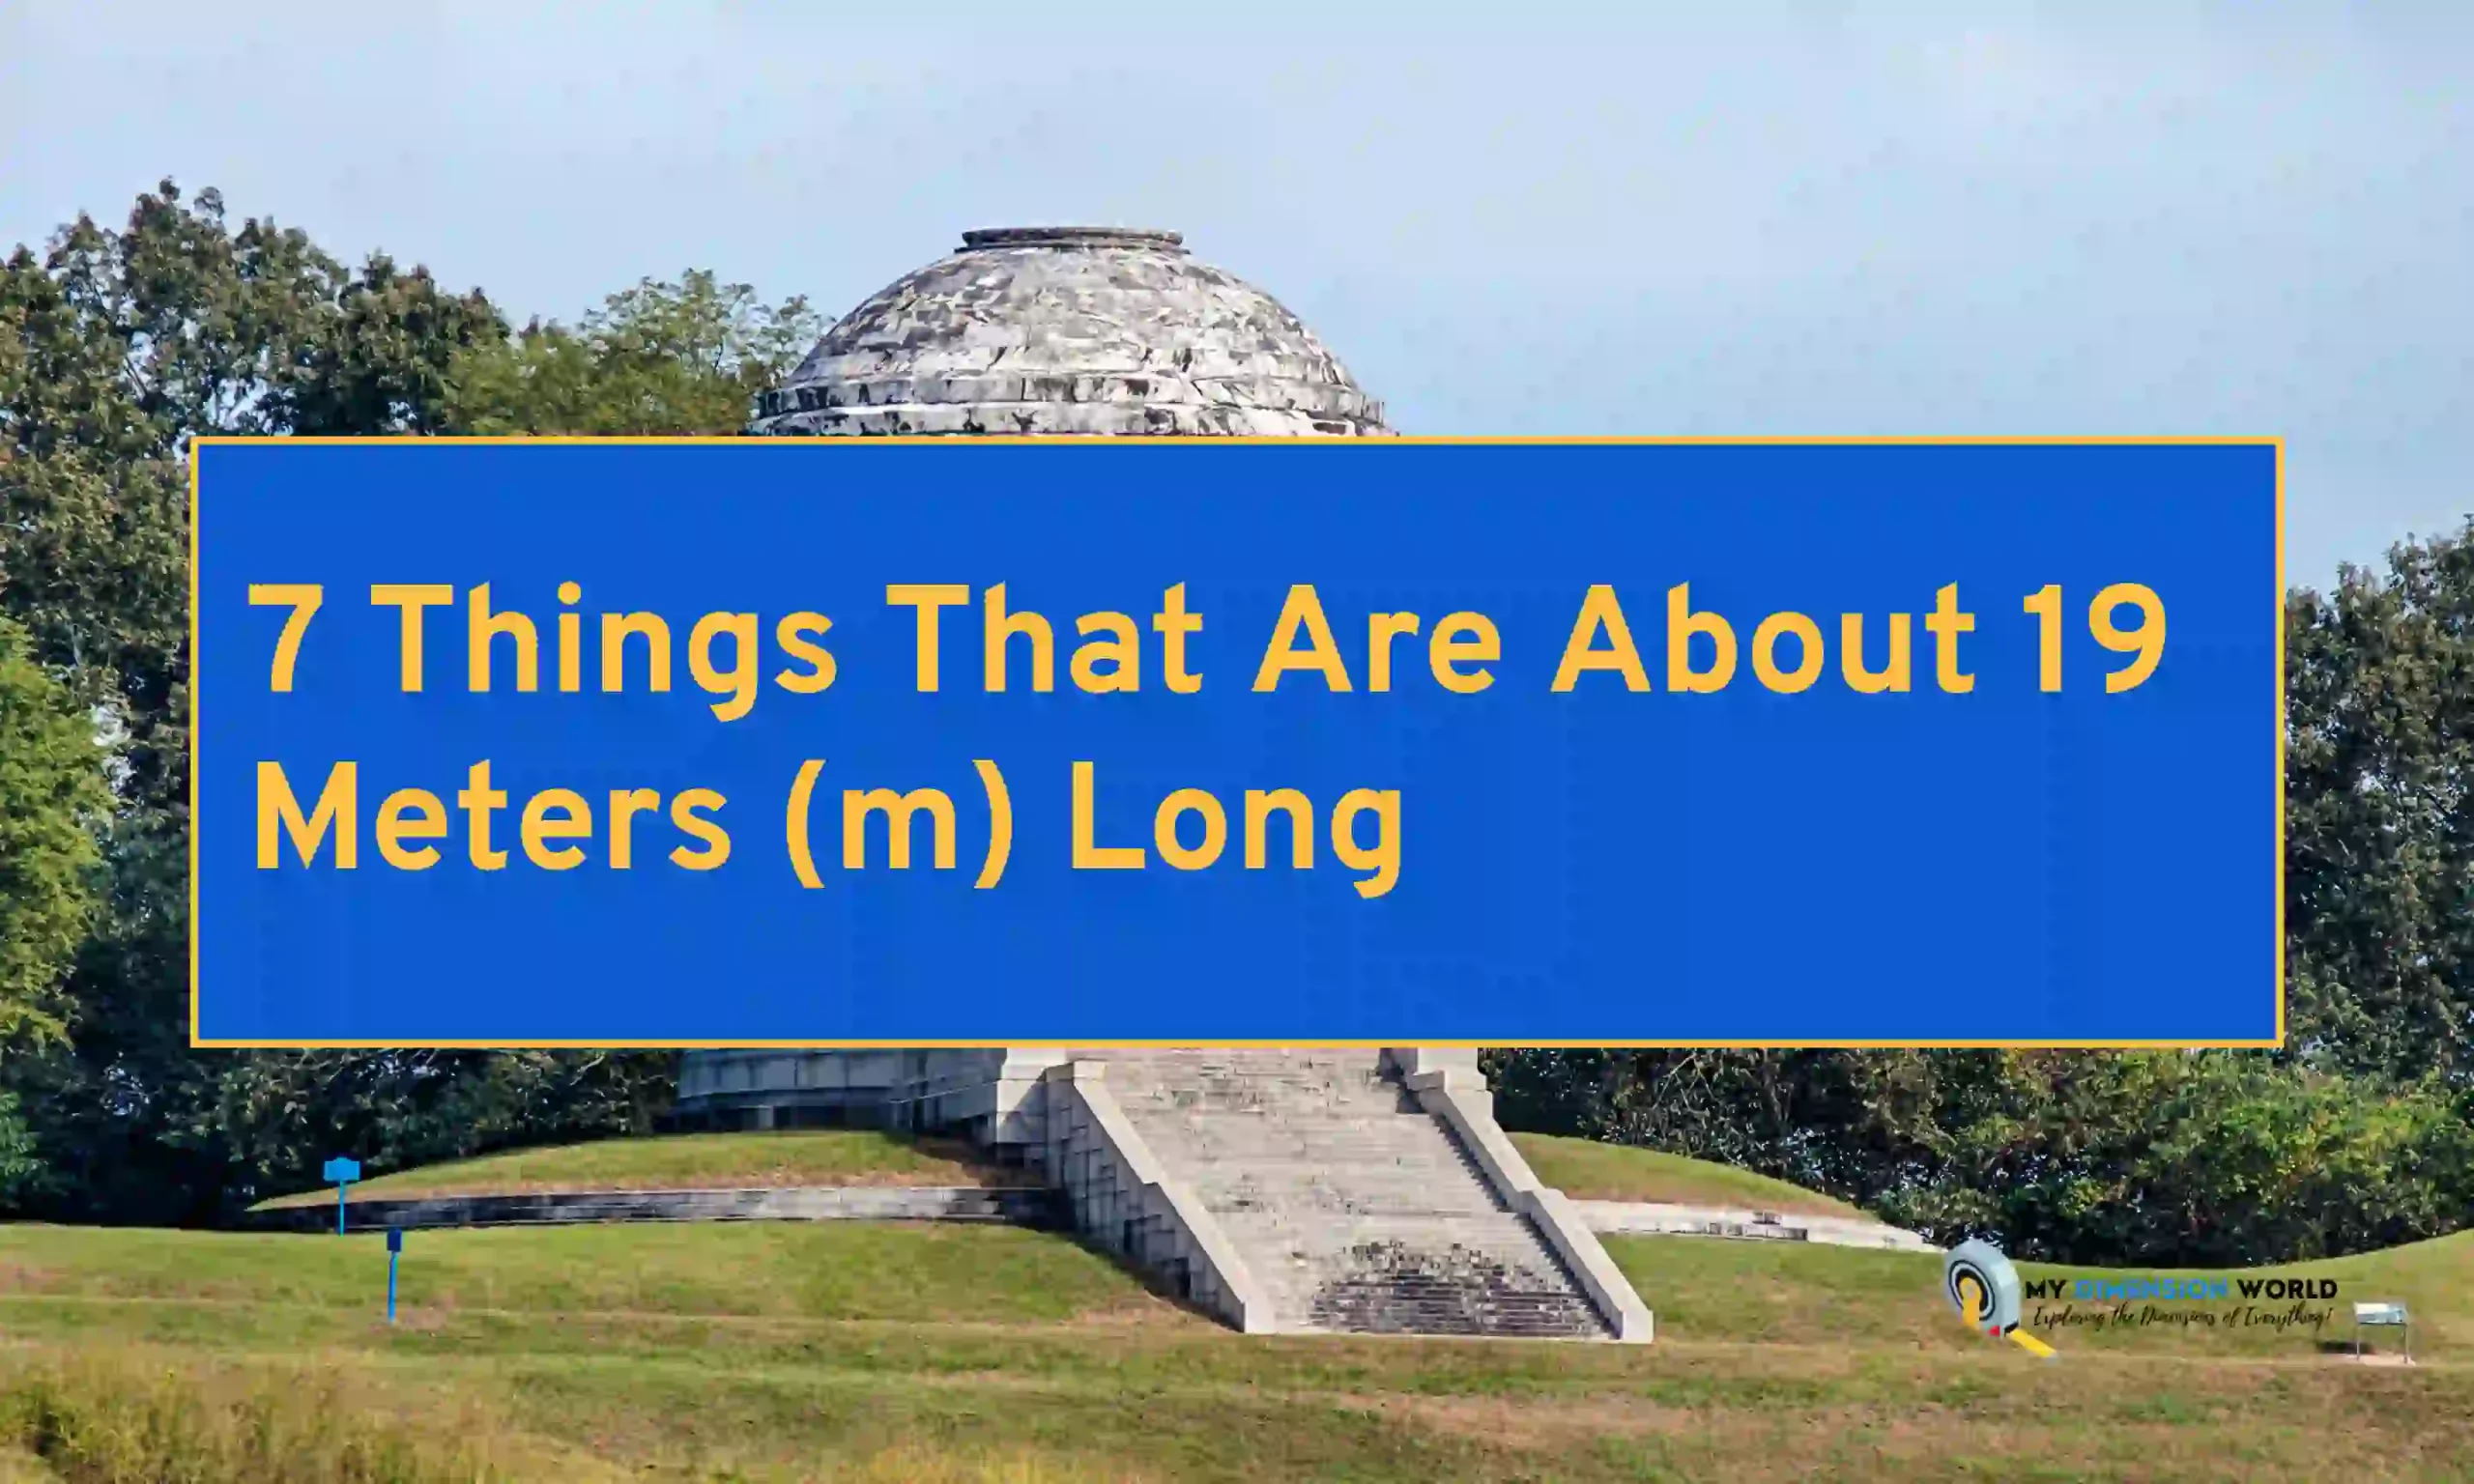 7 Things That Are About 19 Meters (m) Long